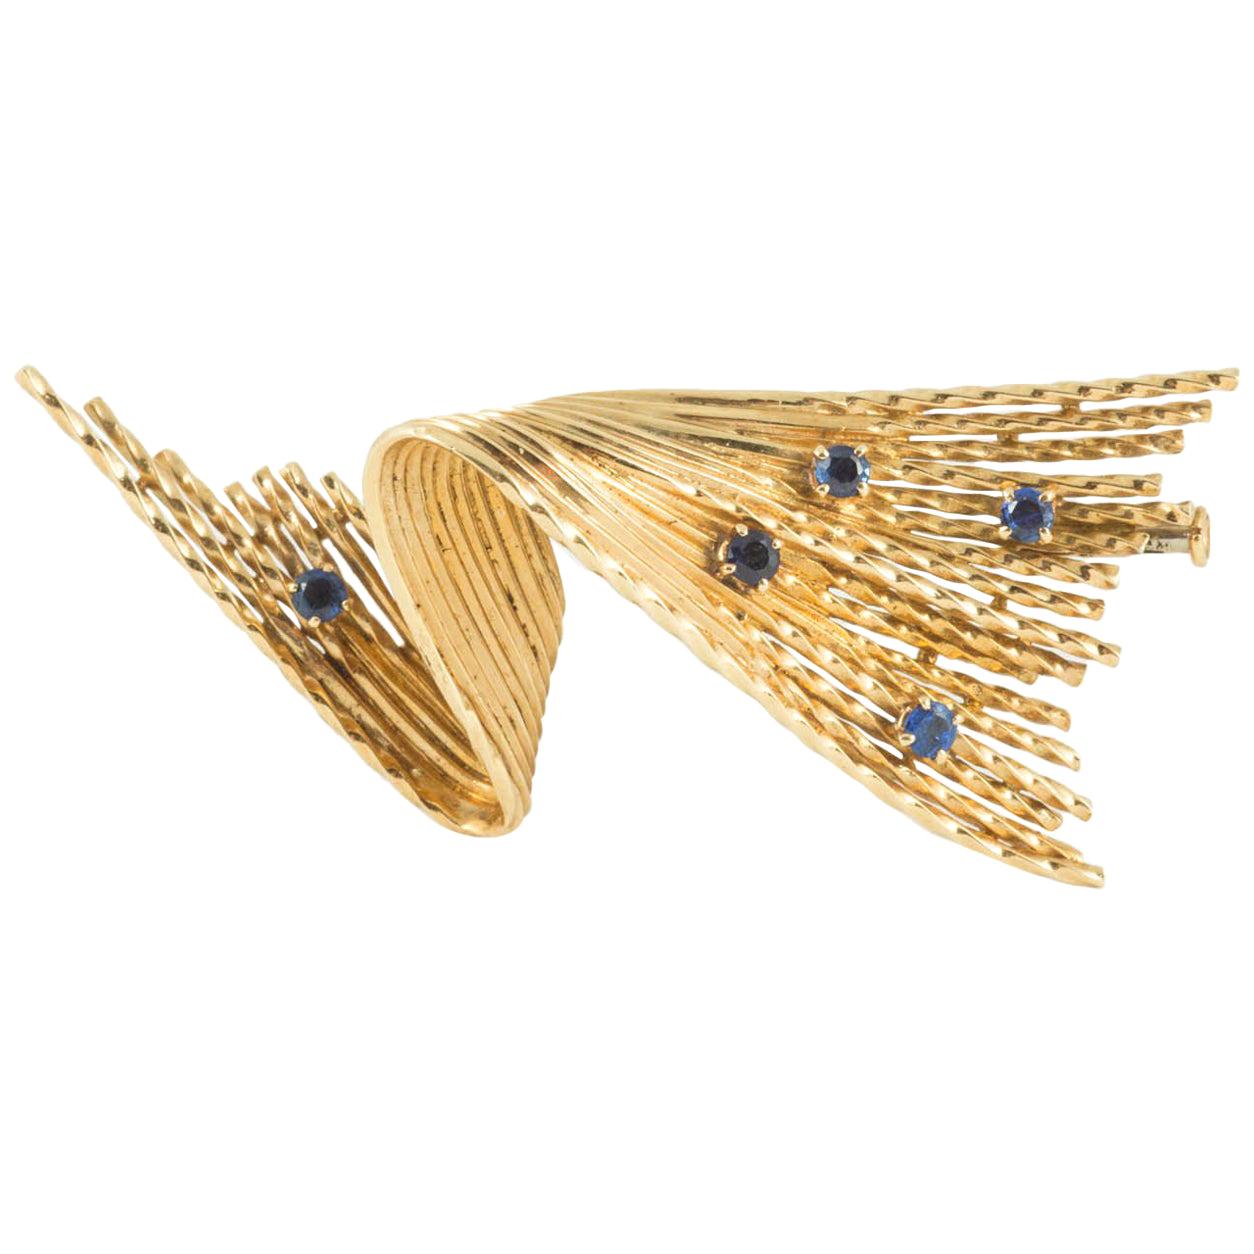 Chaumet of Paris Brooch of Abstract Design, Gold & Sapphires, French, circa 1950 For Sale